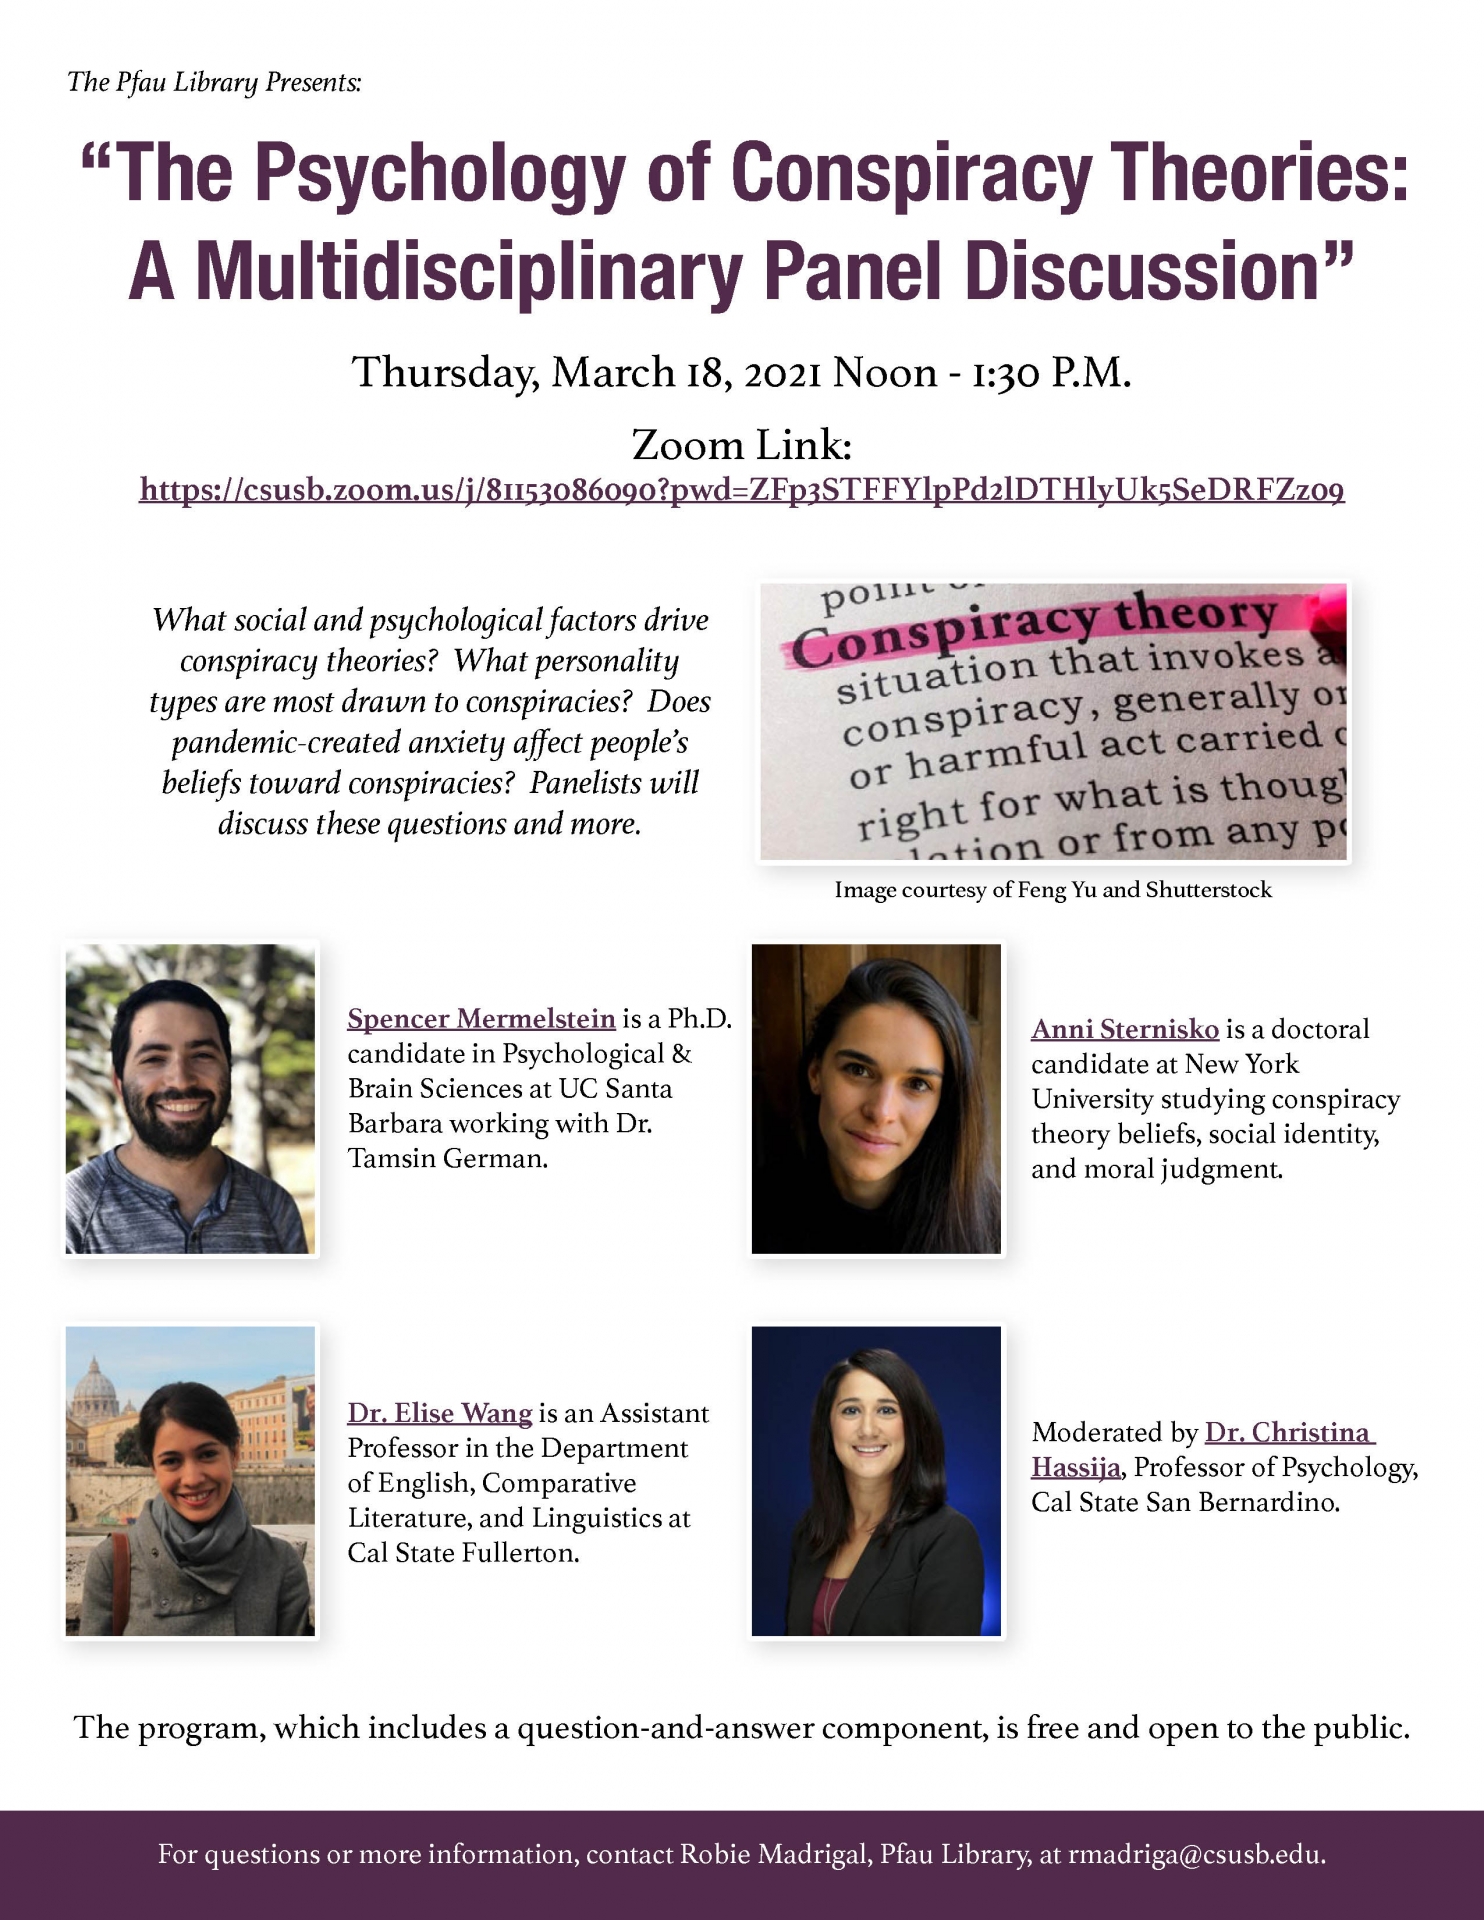 Web flyer for “The Psychology of Conspiracy Theories: A Multidisciplinary Panel Discussion” will 